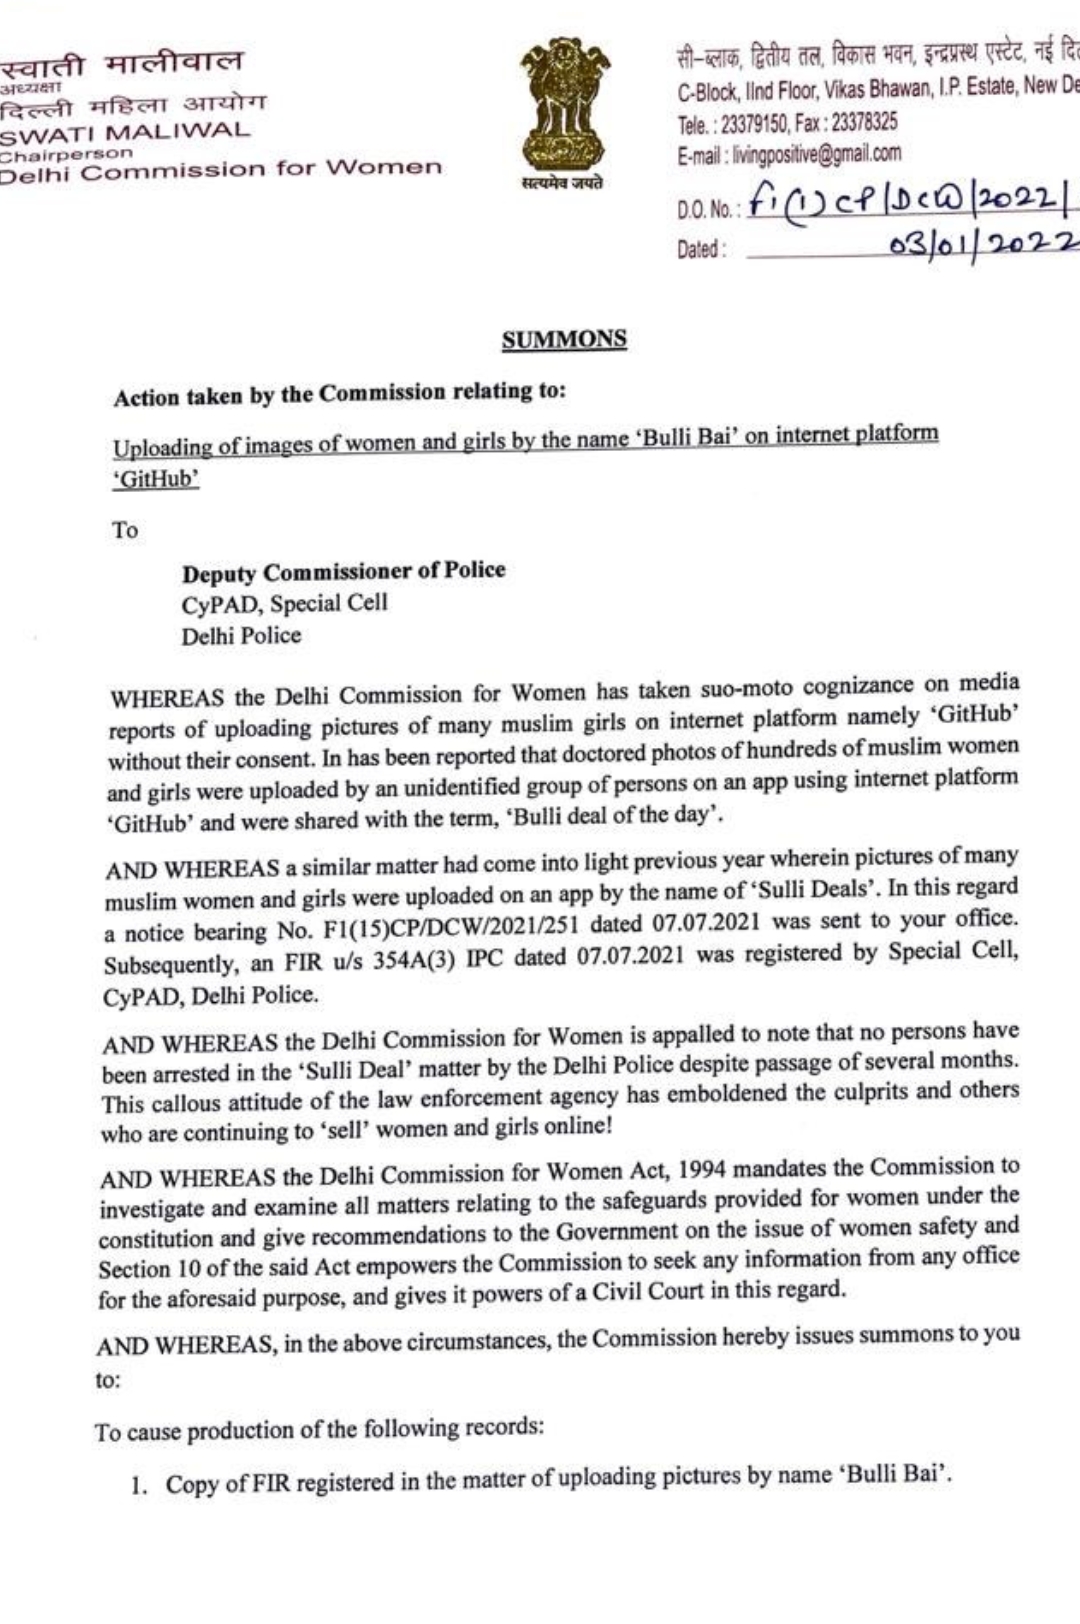 Delhi Commission for Women has summoned Delhi Police as well as Cyber Cell reprimanding it